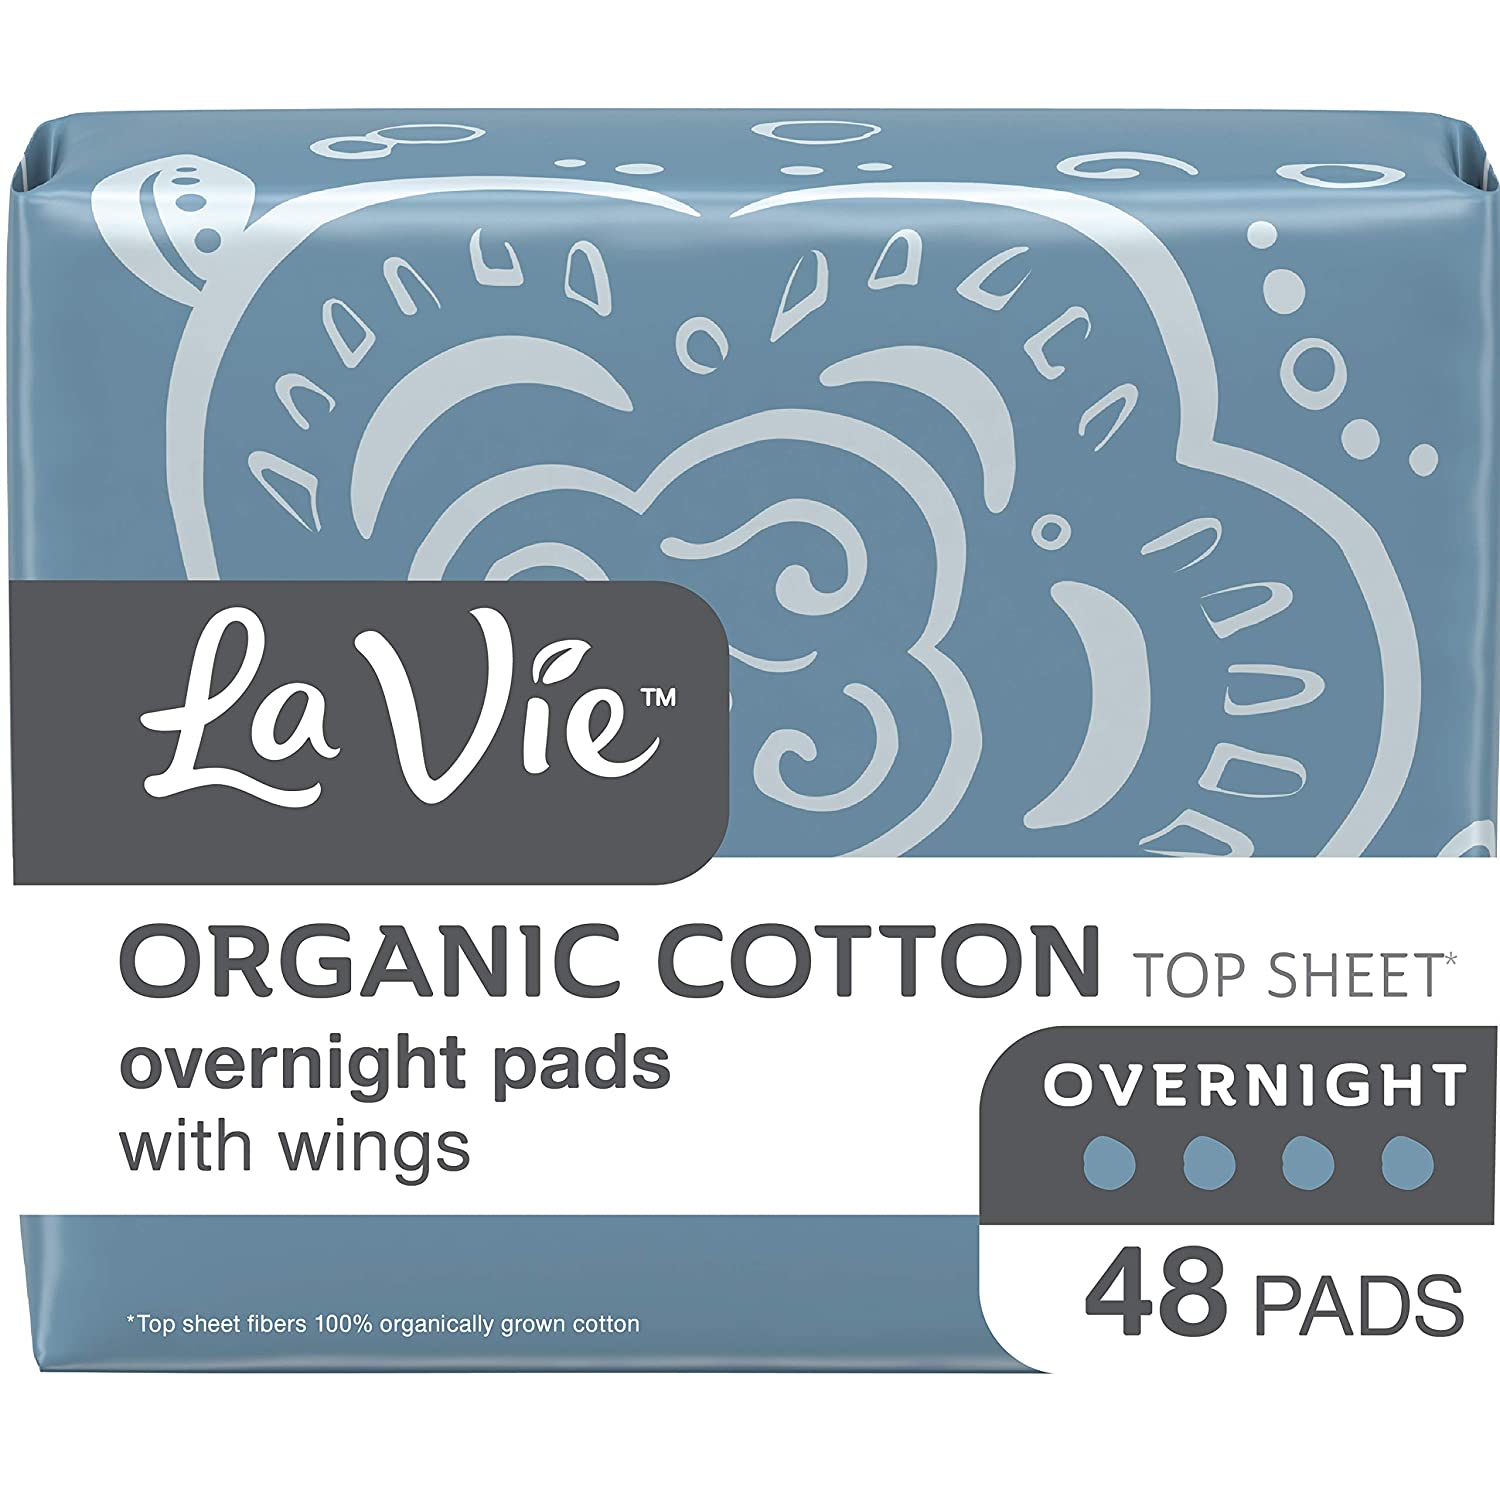 La Vie Organic Cotton Top Sheet* Feminine or Postpartum Pads with Wings, Overnight, Long, 48 Count